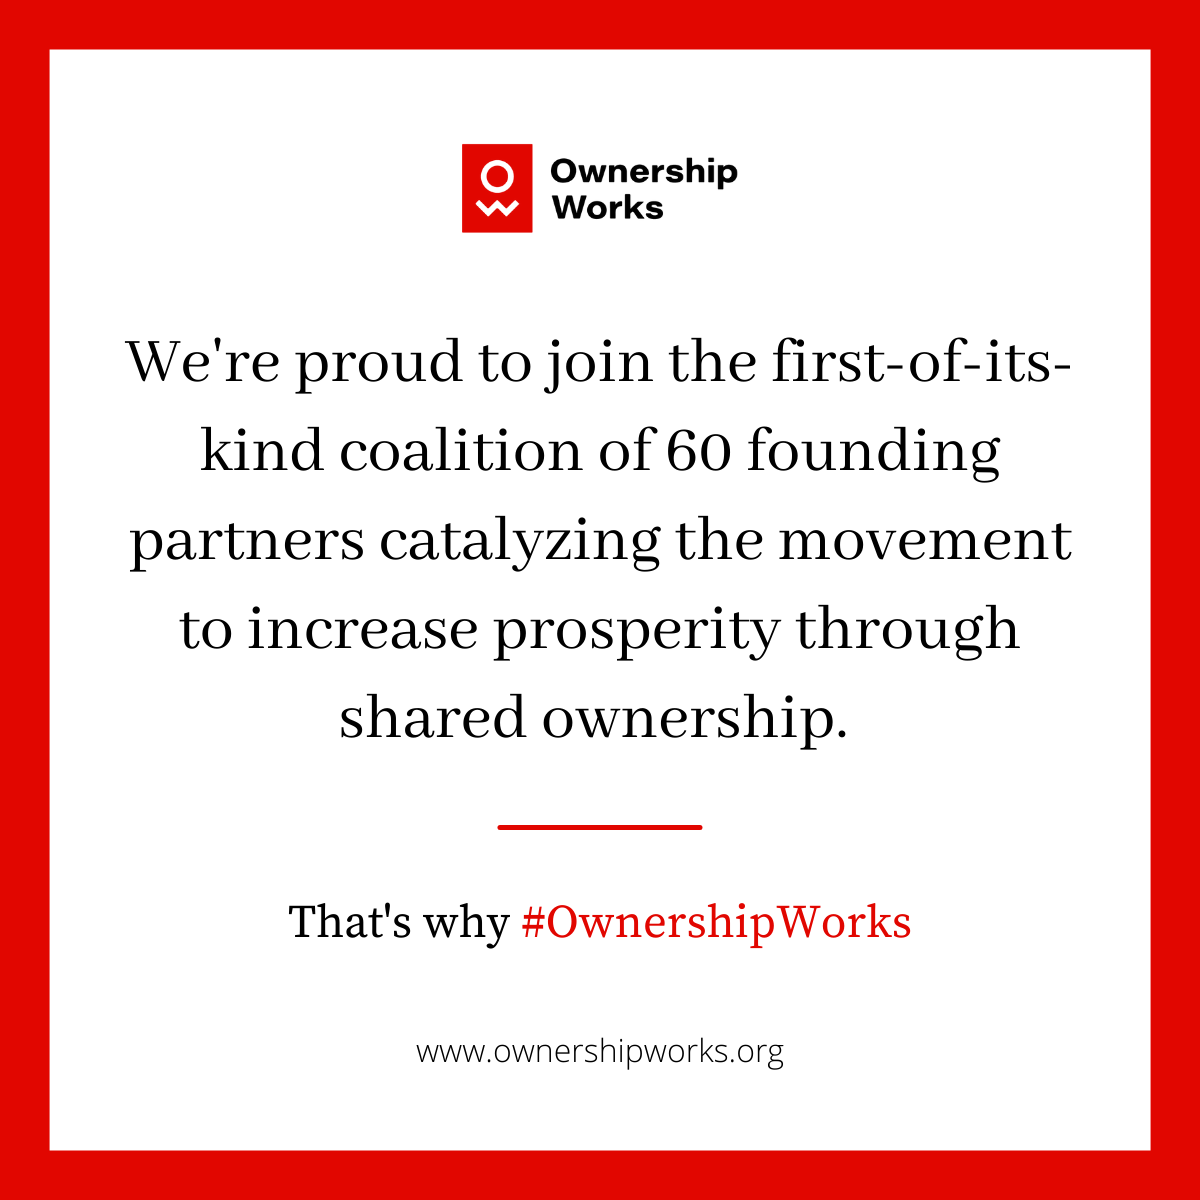 Quote from Ownership Works. We‘re proud to join the first-of-its-kind coalition of 60 founding partners catalyzing the movement to increase prosperity through shared ownership.